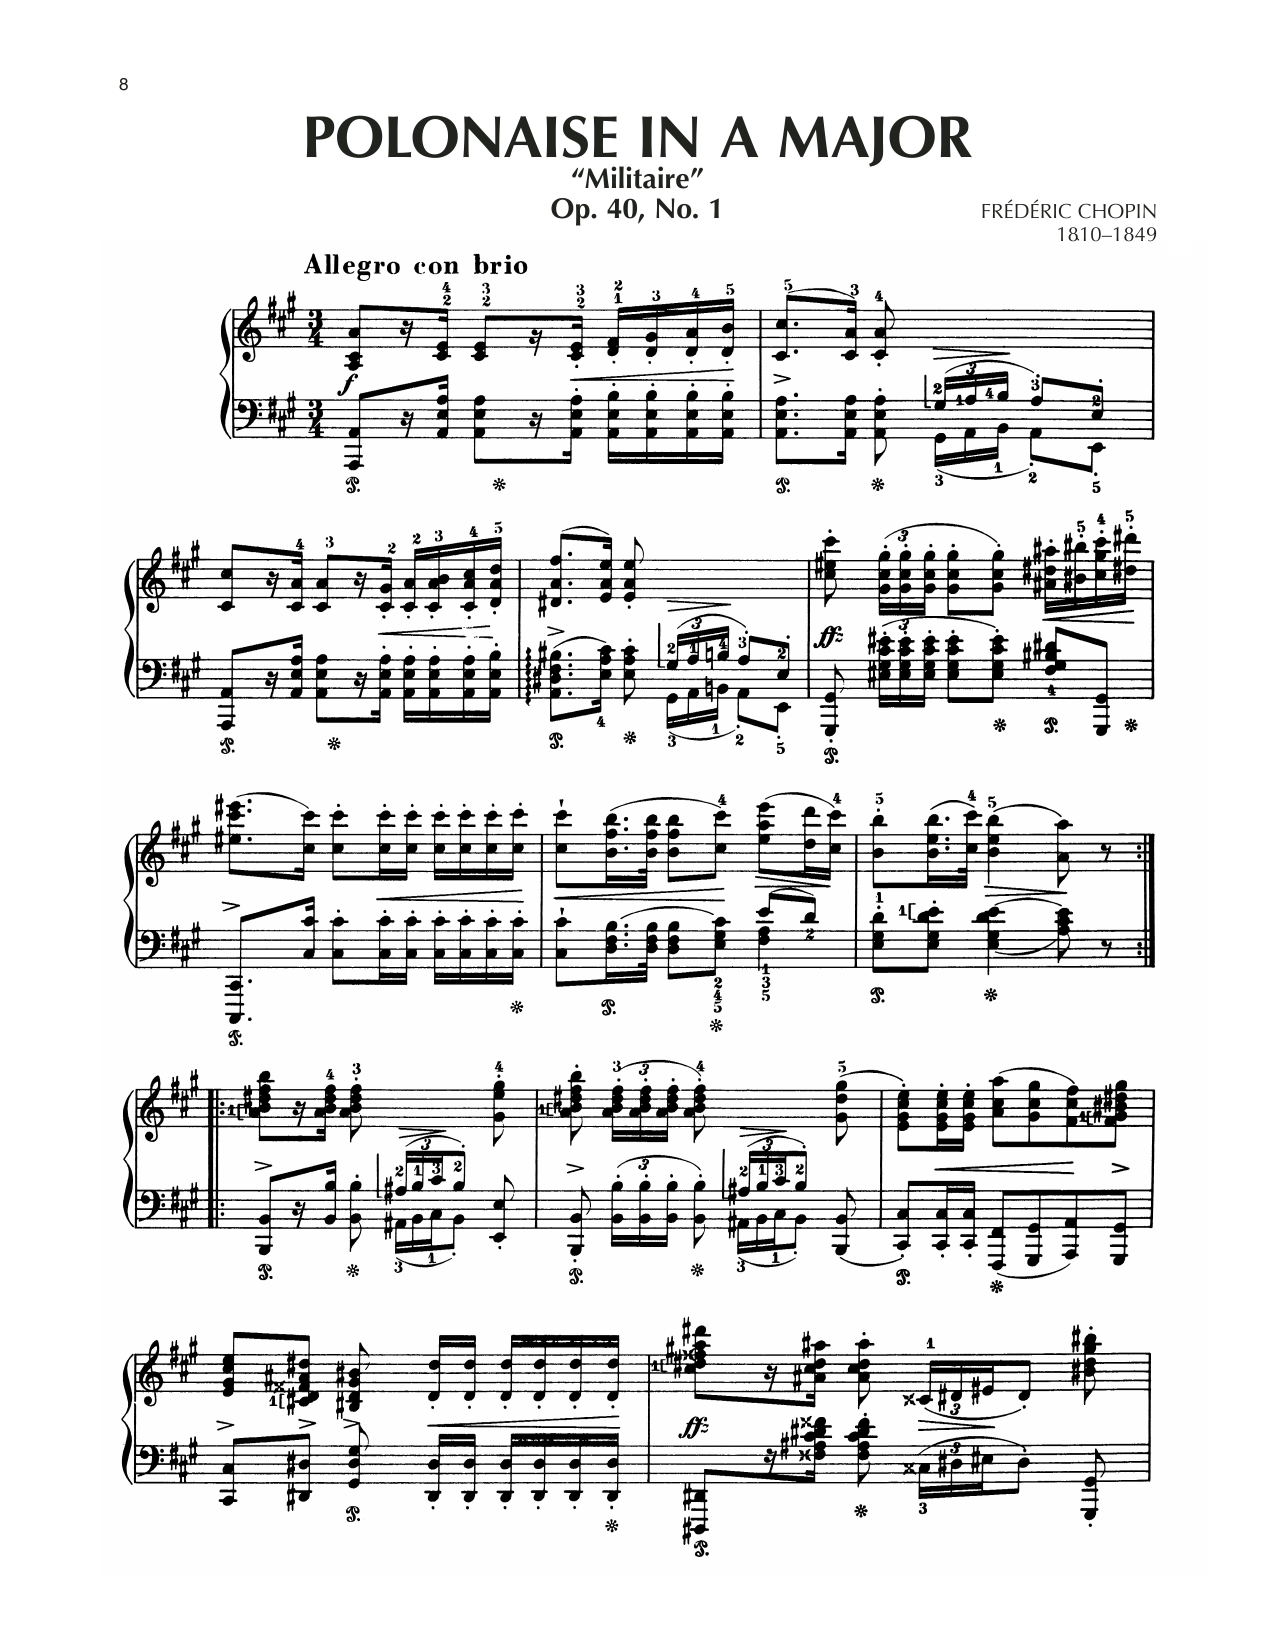 Frederic Chopin Polonaise In A Major, Op. 40, No. 1 sheet music notes printable PDF score